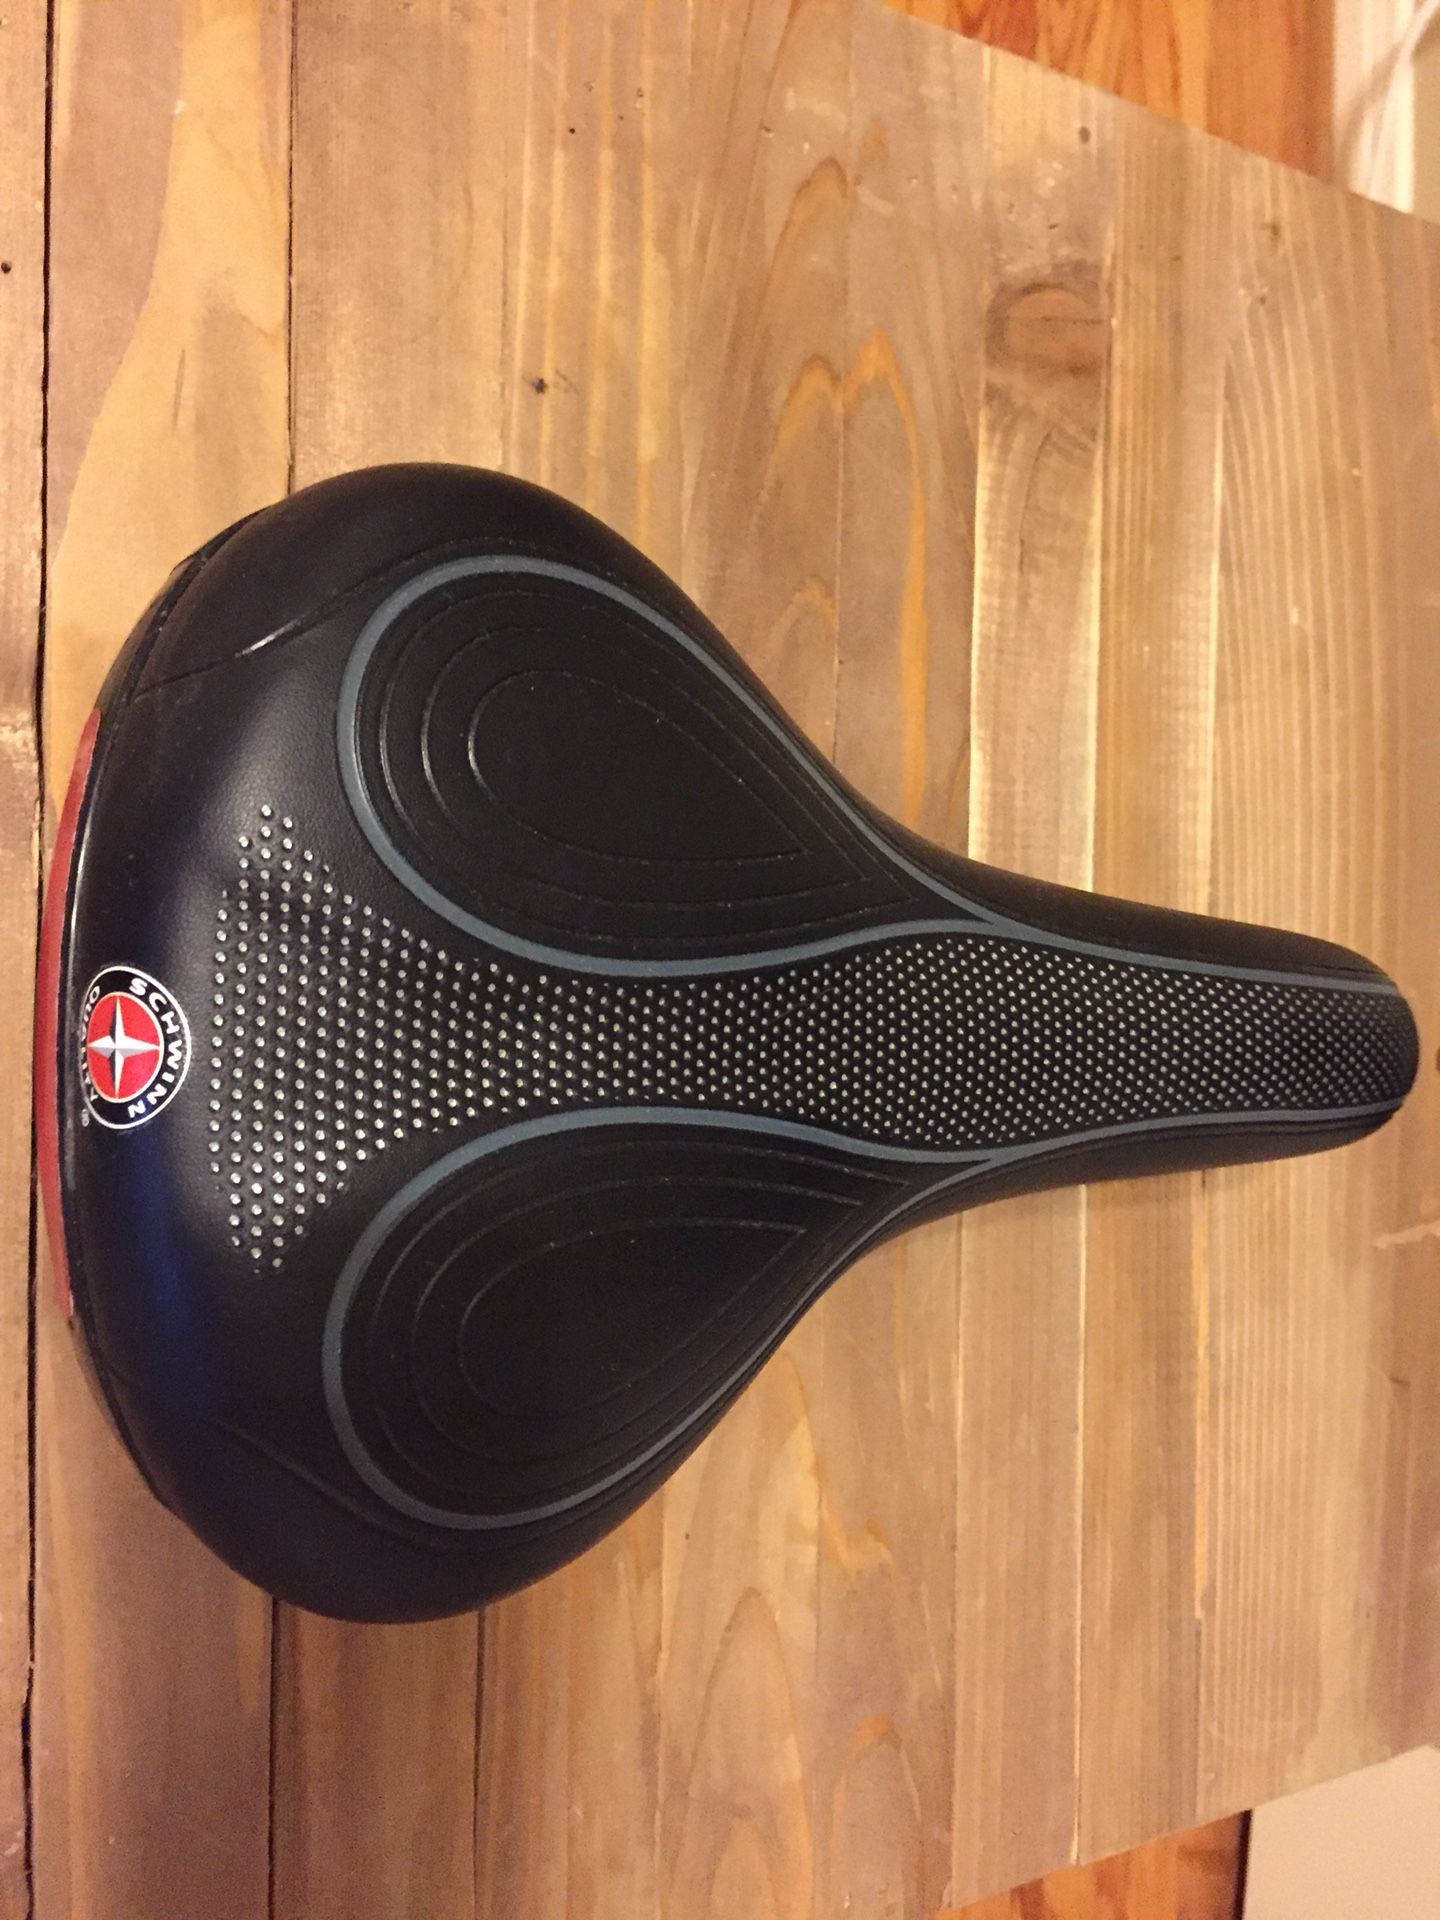 Schwinn bicycle seat with mounting bracket. Perfect condition never used.